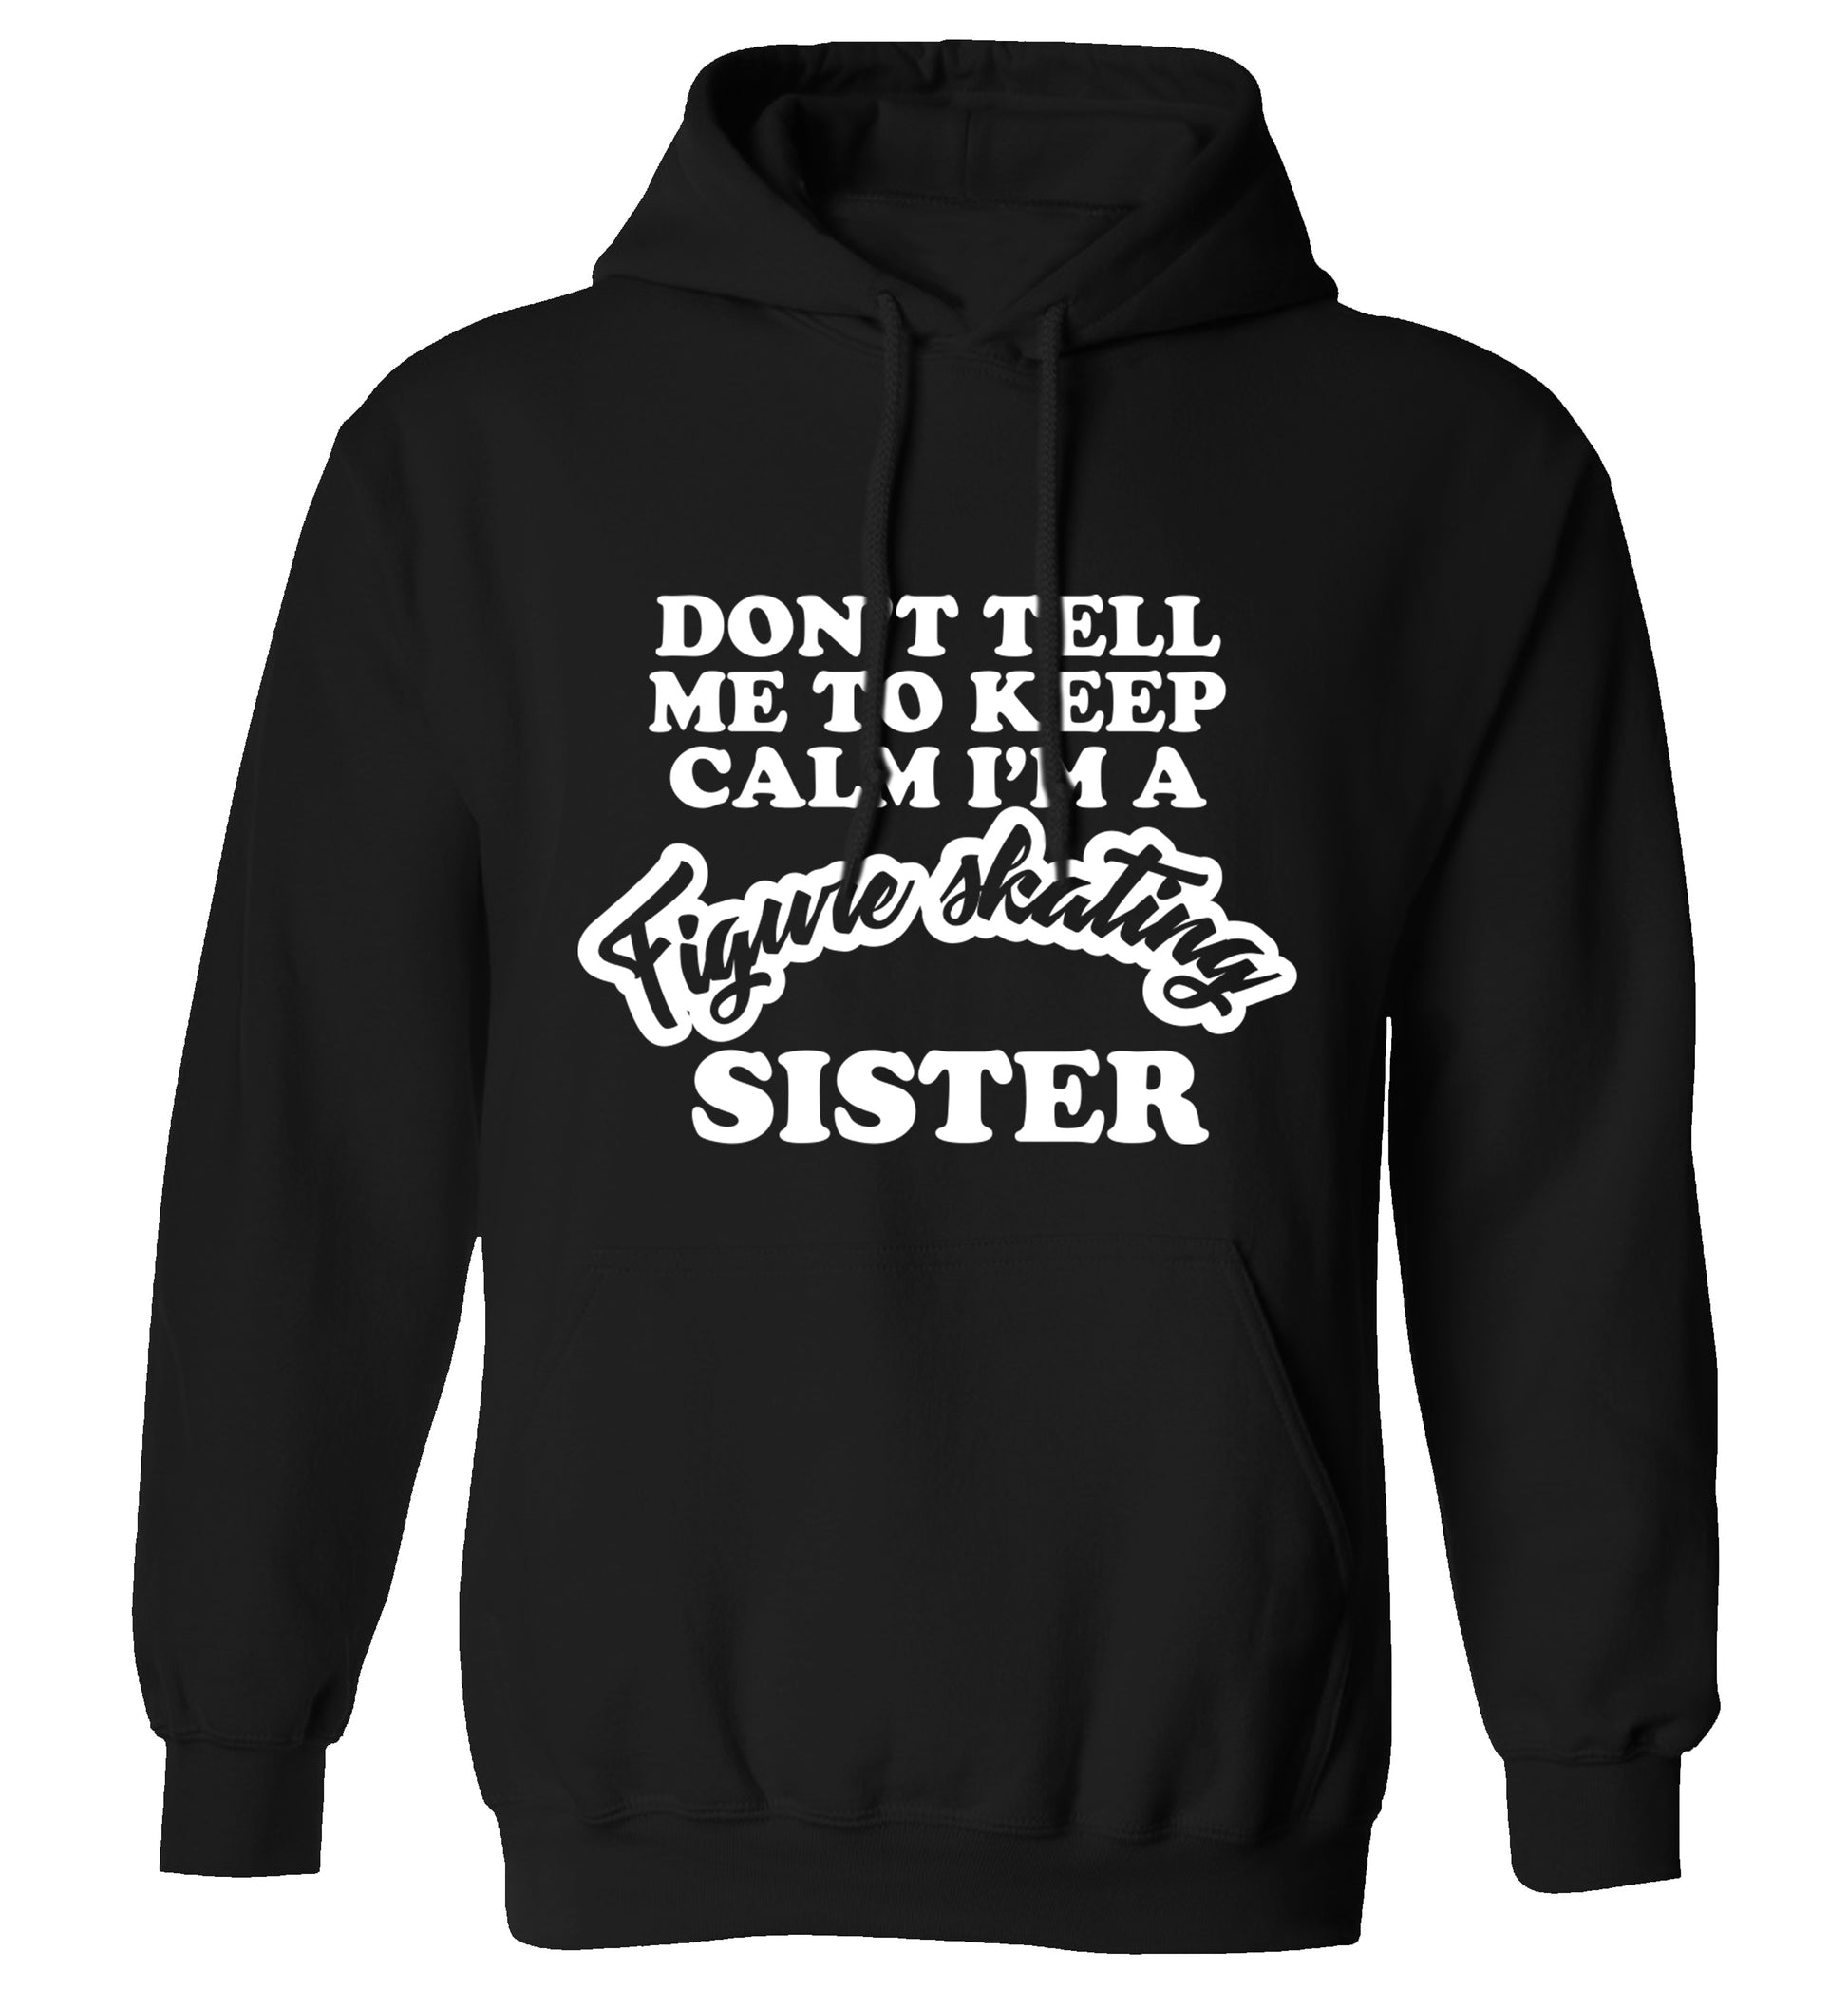 Don't tell me to keep calm I'm a figure skating sister adults unisexblack hoodie 2XL